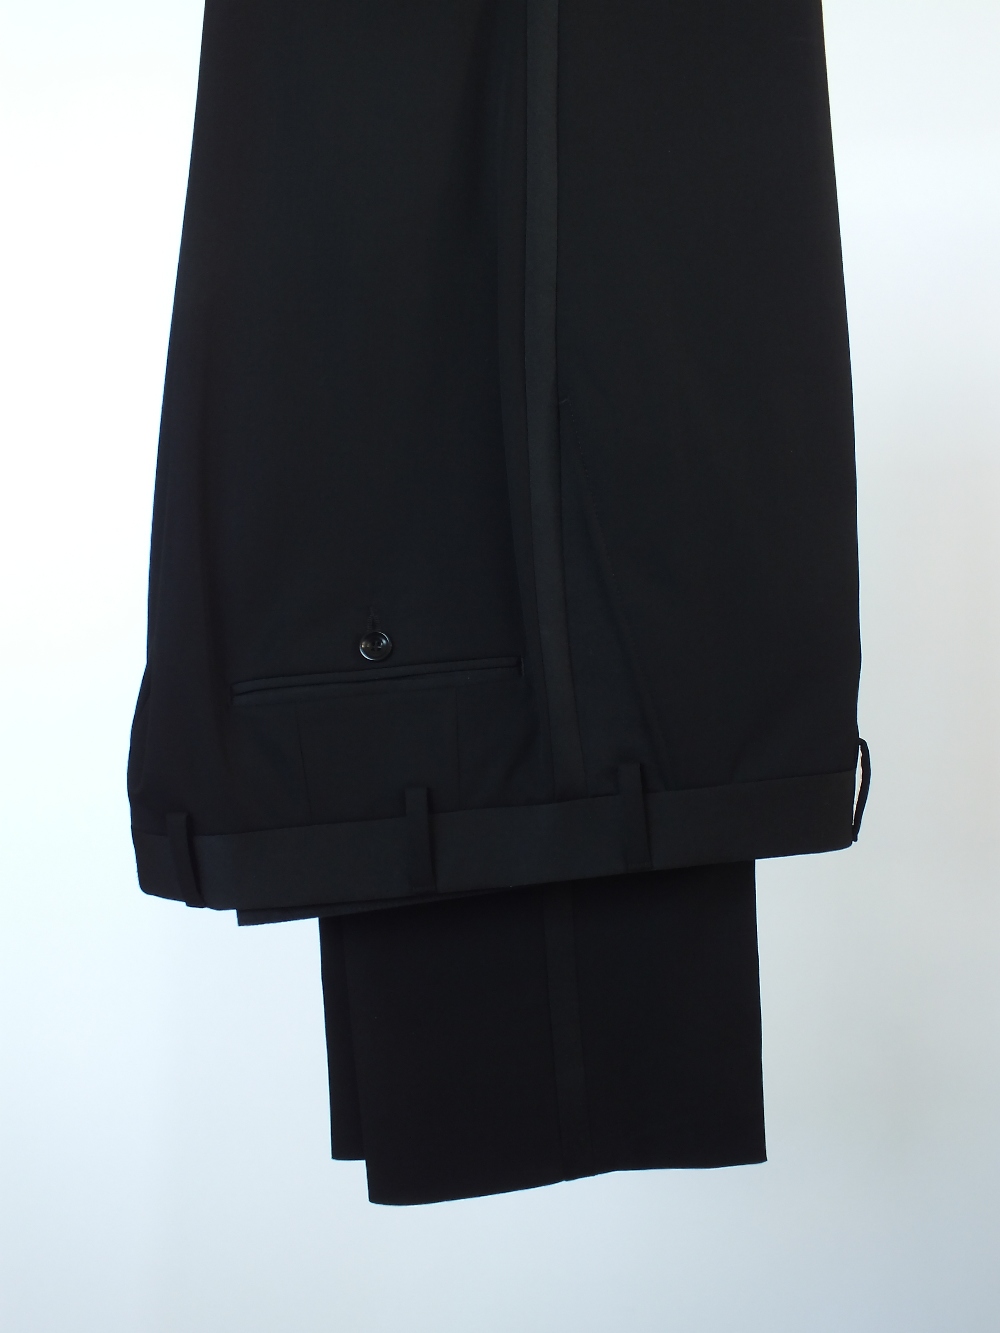 A LAB. Pal Zileri dinner suit, black, lined, Italian size 52R, 100% wool, flat front to trousers, - Image 6 of 6